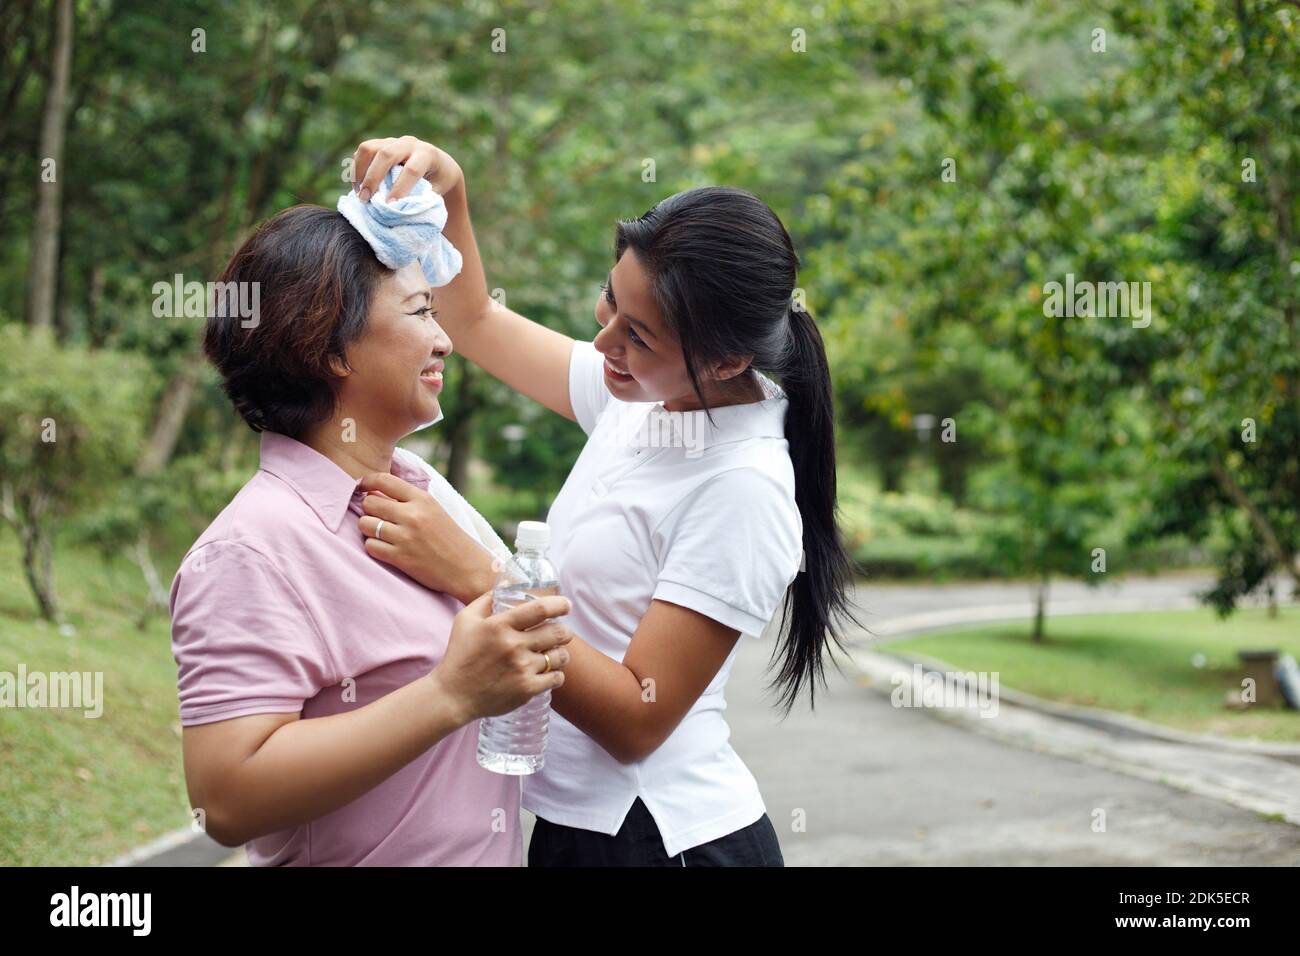 Daughter Wiping Mother Sweat After Exercising Stock Photo - Alamy